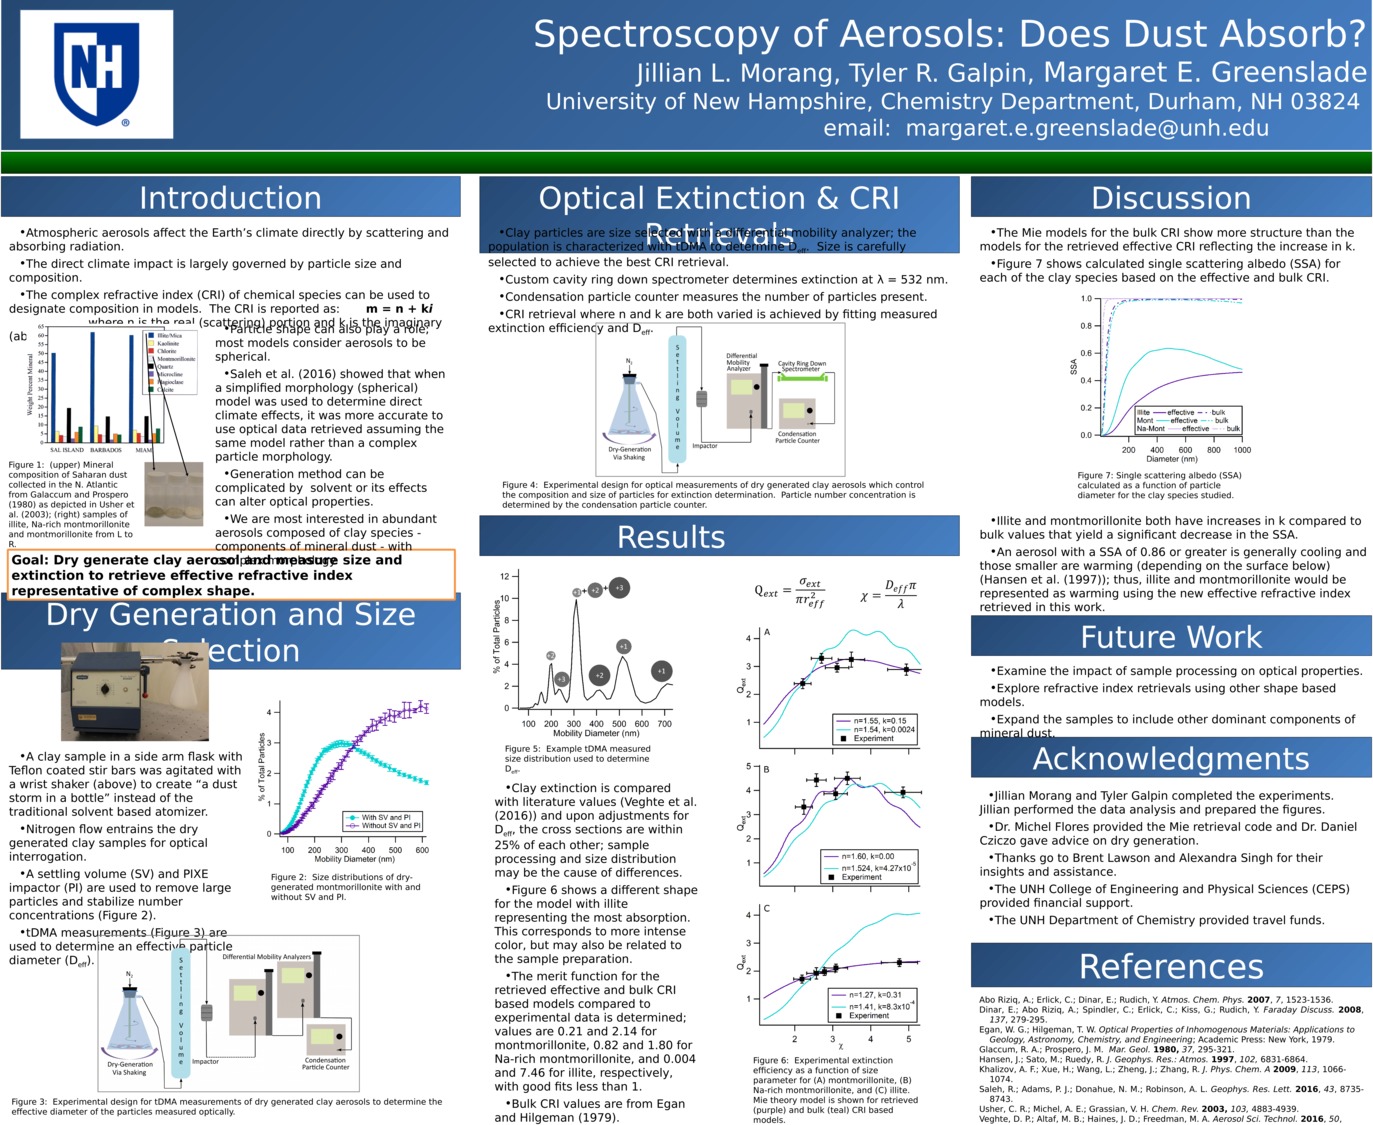 Spectroscopy Of Aerosols: Does Dust Absorb? by mgreenslade